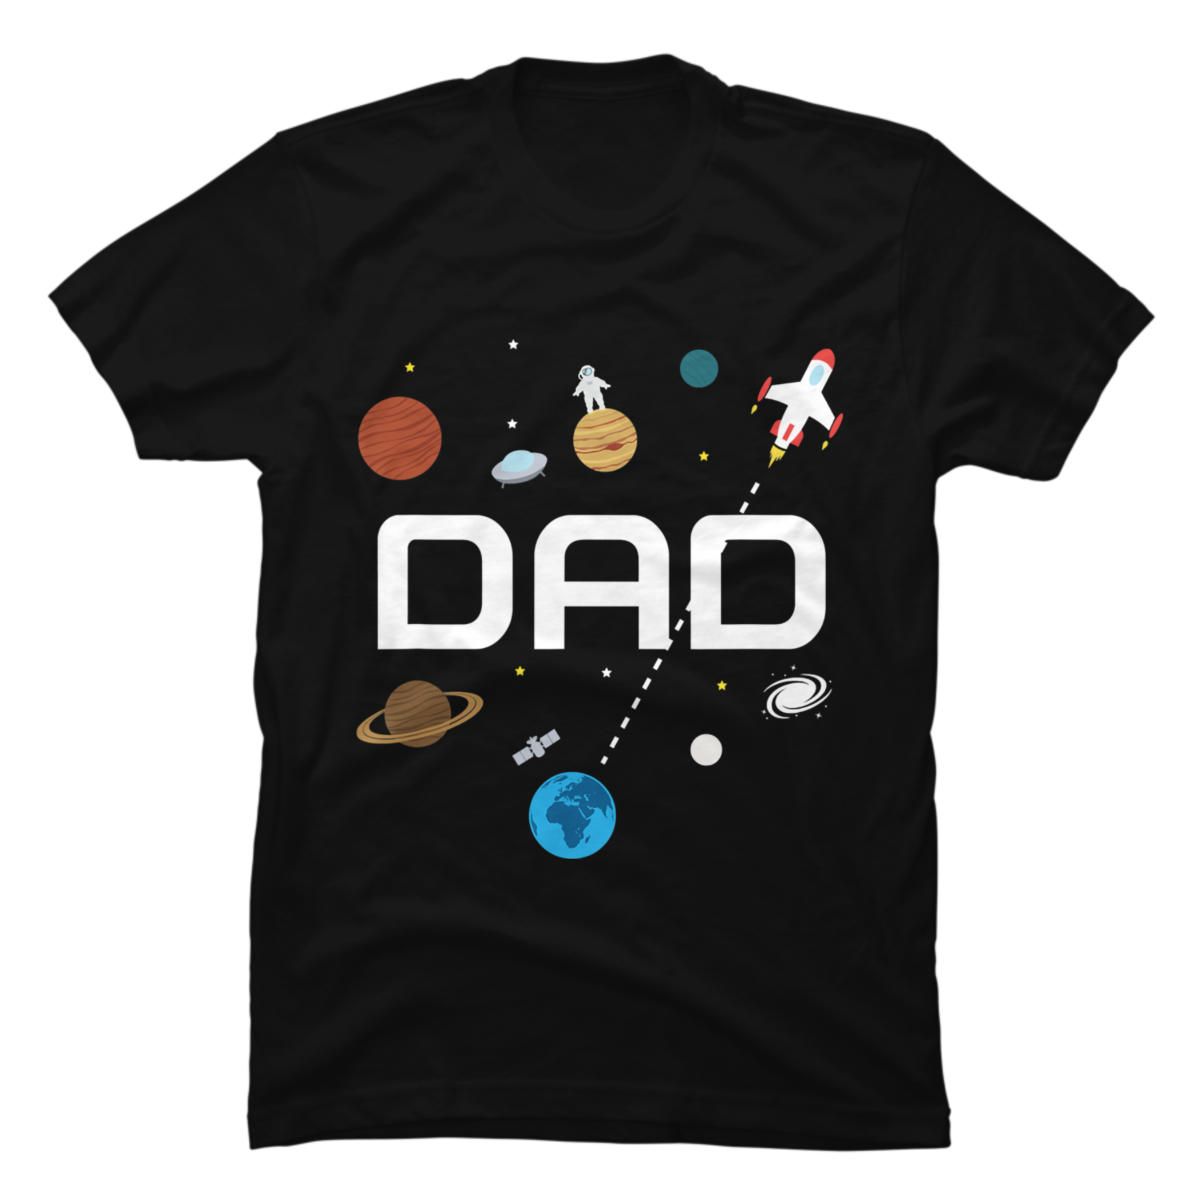 Dad Outer Space Birthday Party - Buy t-shirt designs